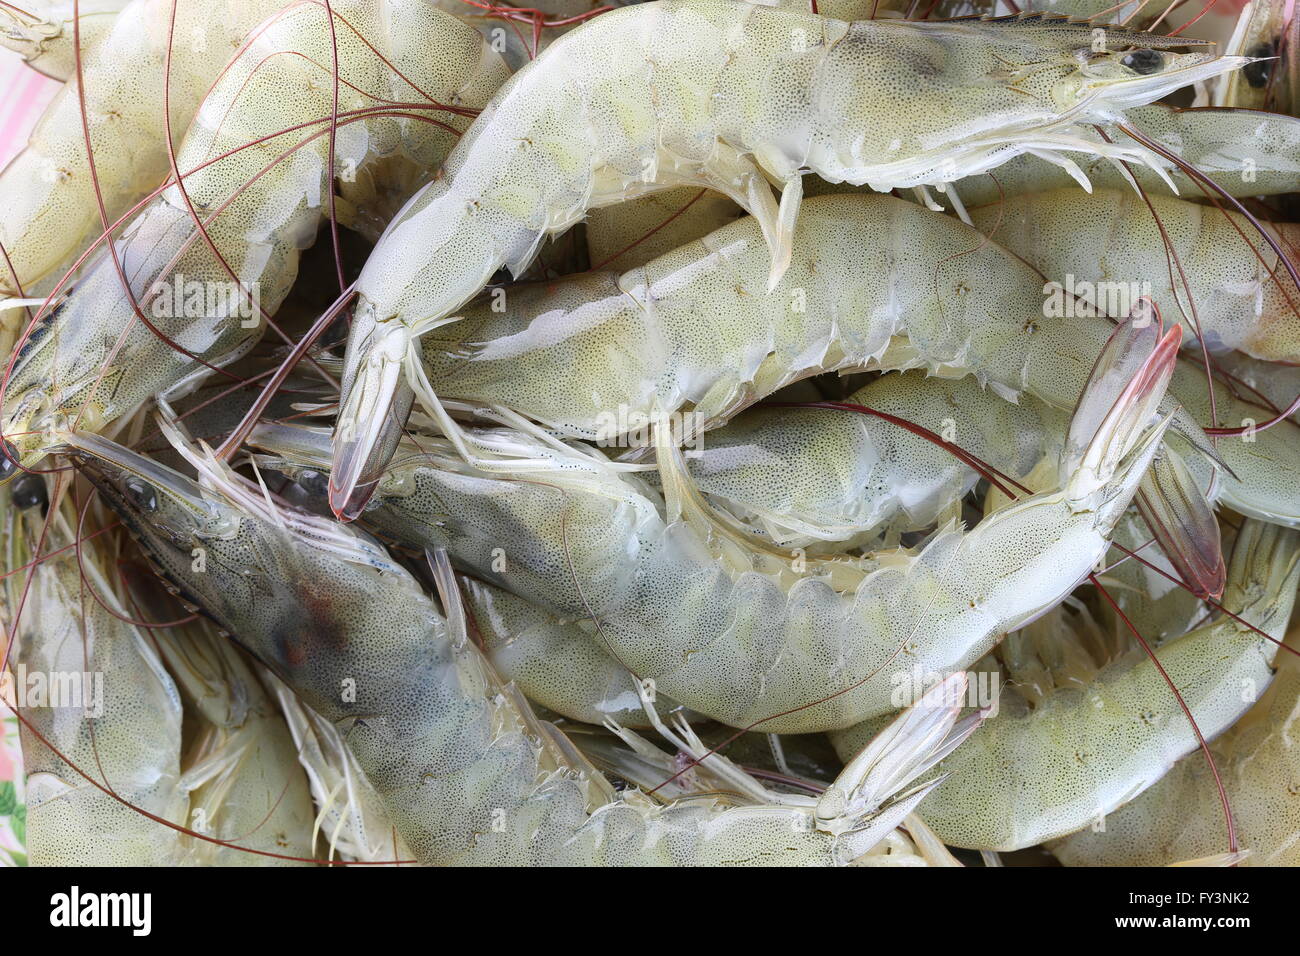 fresh raw shrimp as garnish in cooking,White shrimp or vannamei aquaculture in Thailand economic much valued to exports. Stock Photo